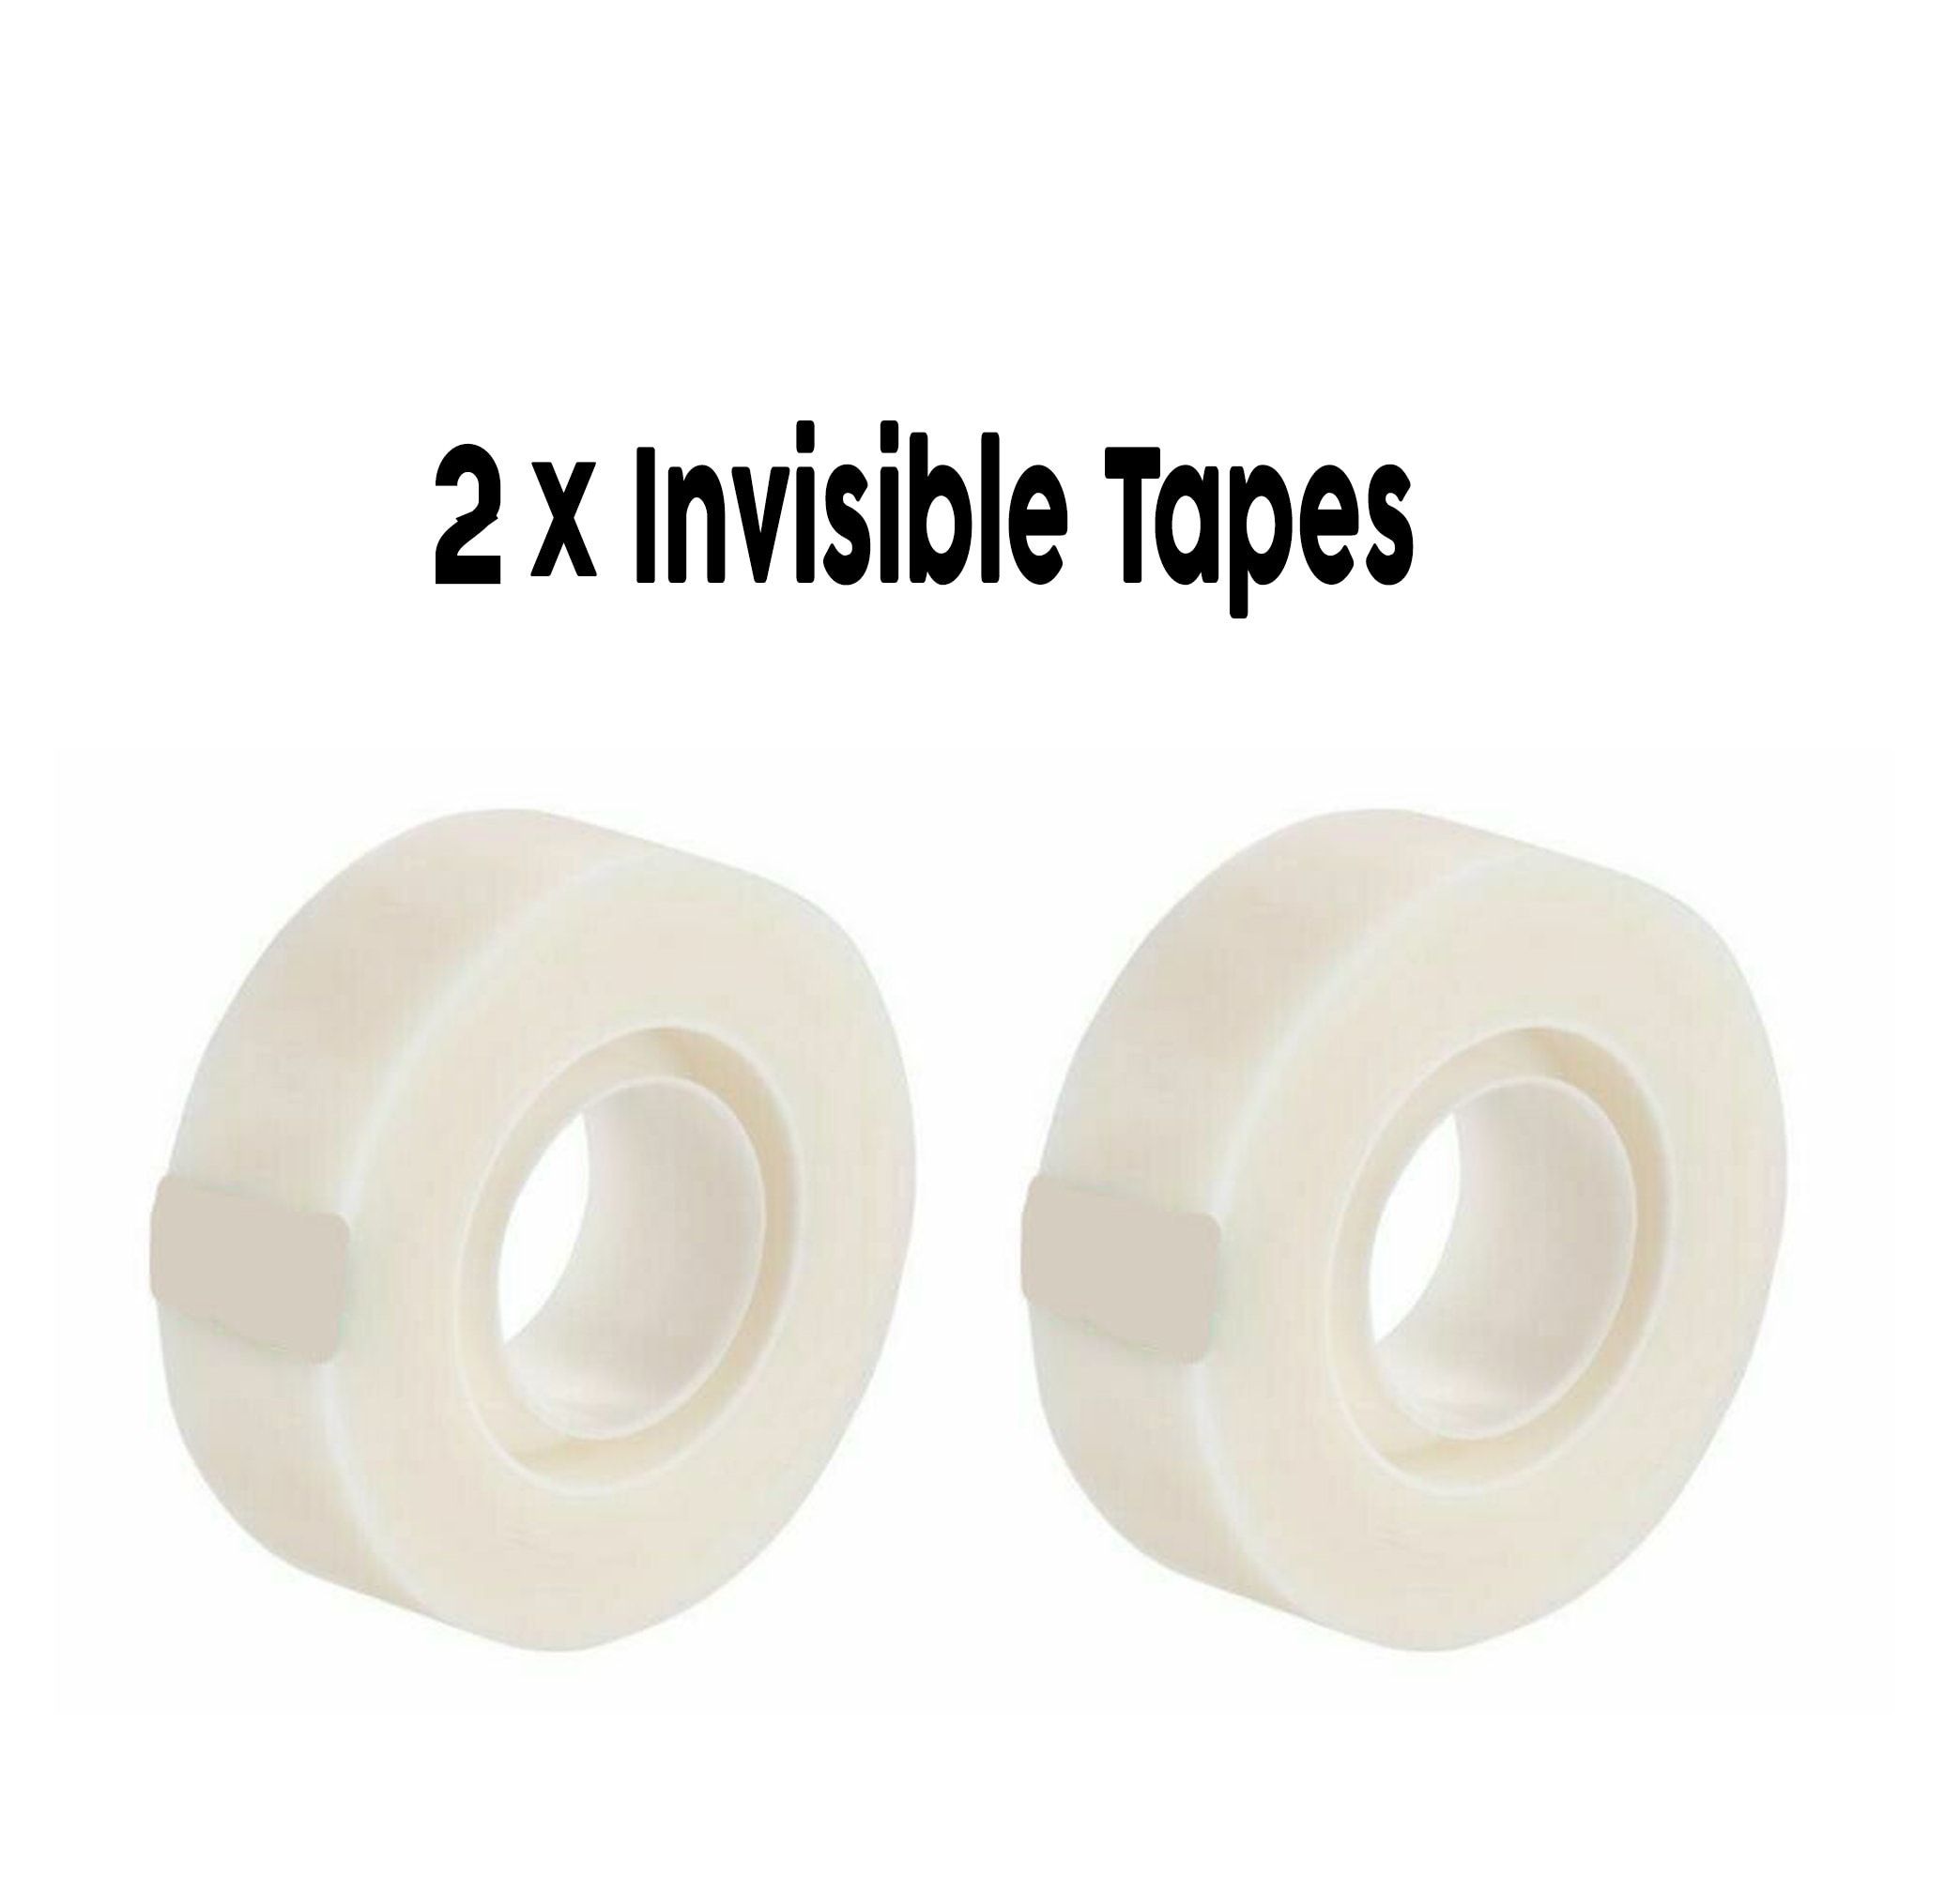 12 Rolls 0.7 Inches Transparent Tape Refills, Clear Tape Dispenser Refill  Rolls, Glossy Gift Wrap Tapes for Office, School, Home 